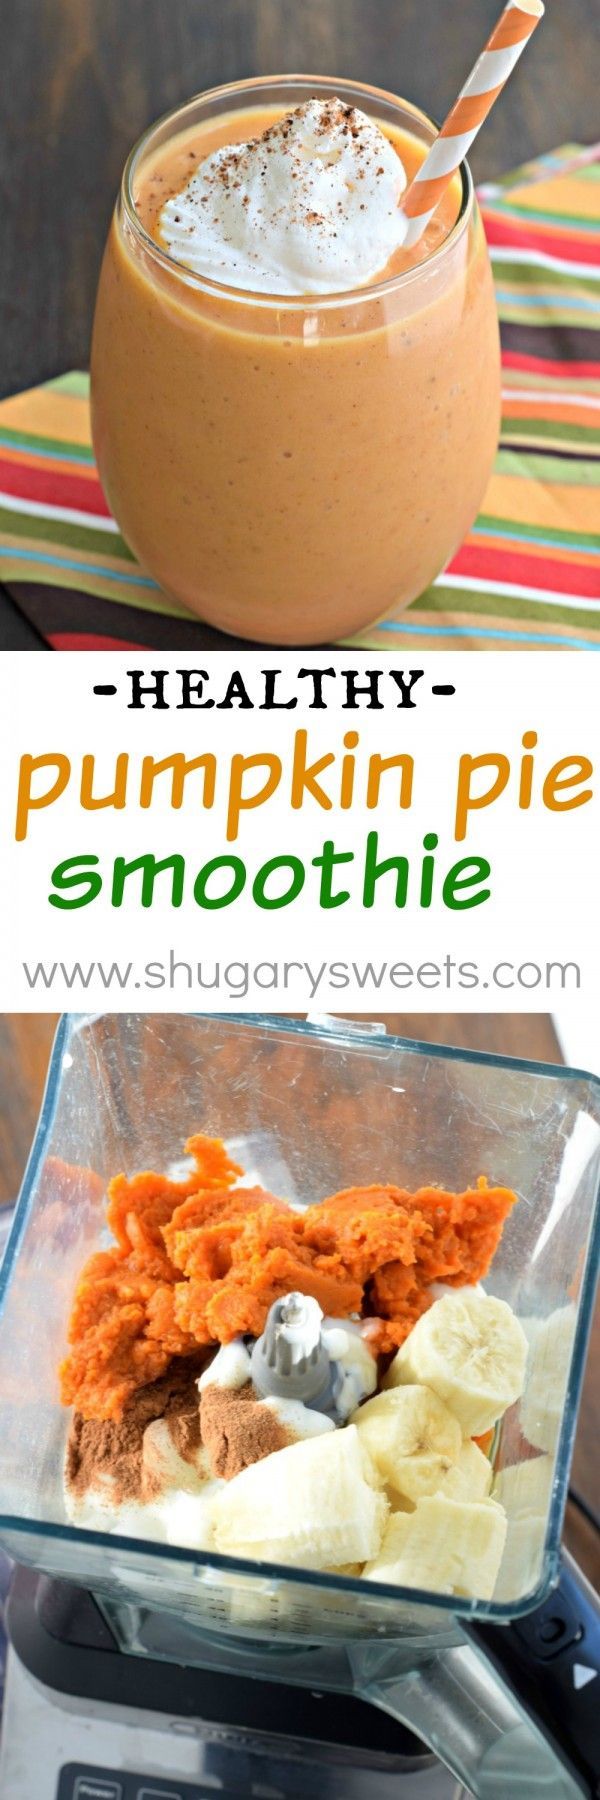 Whip up one of these delicious Pumpkin Pie Smoothies for breakfast today! The perf